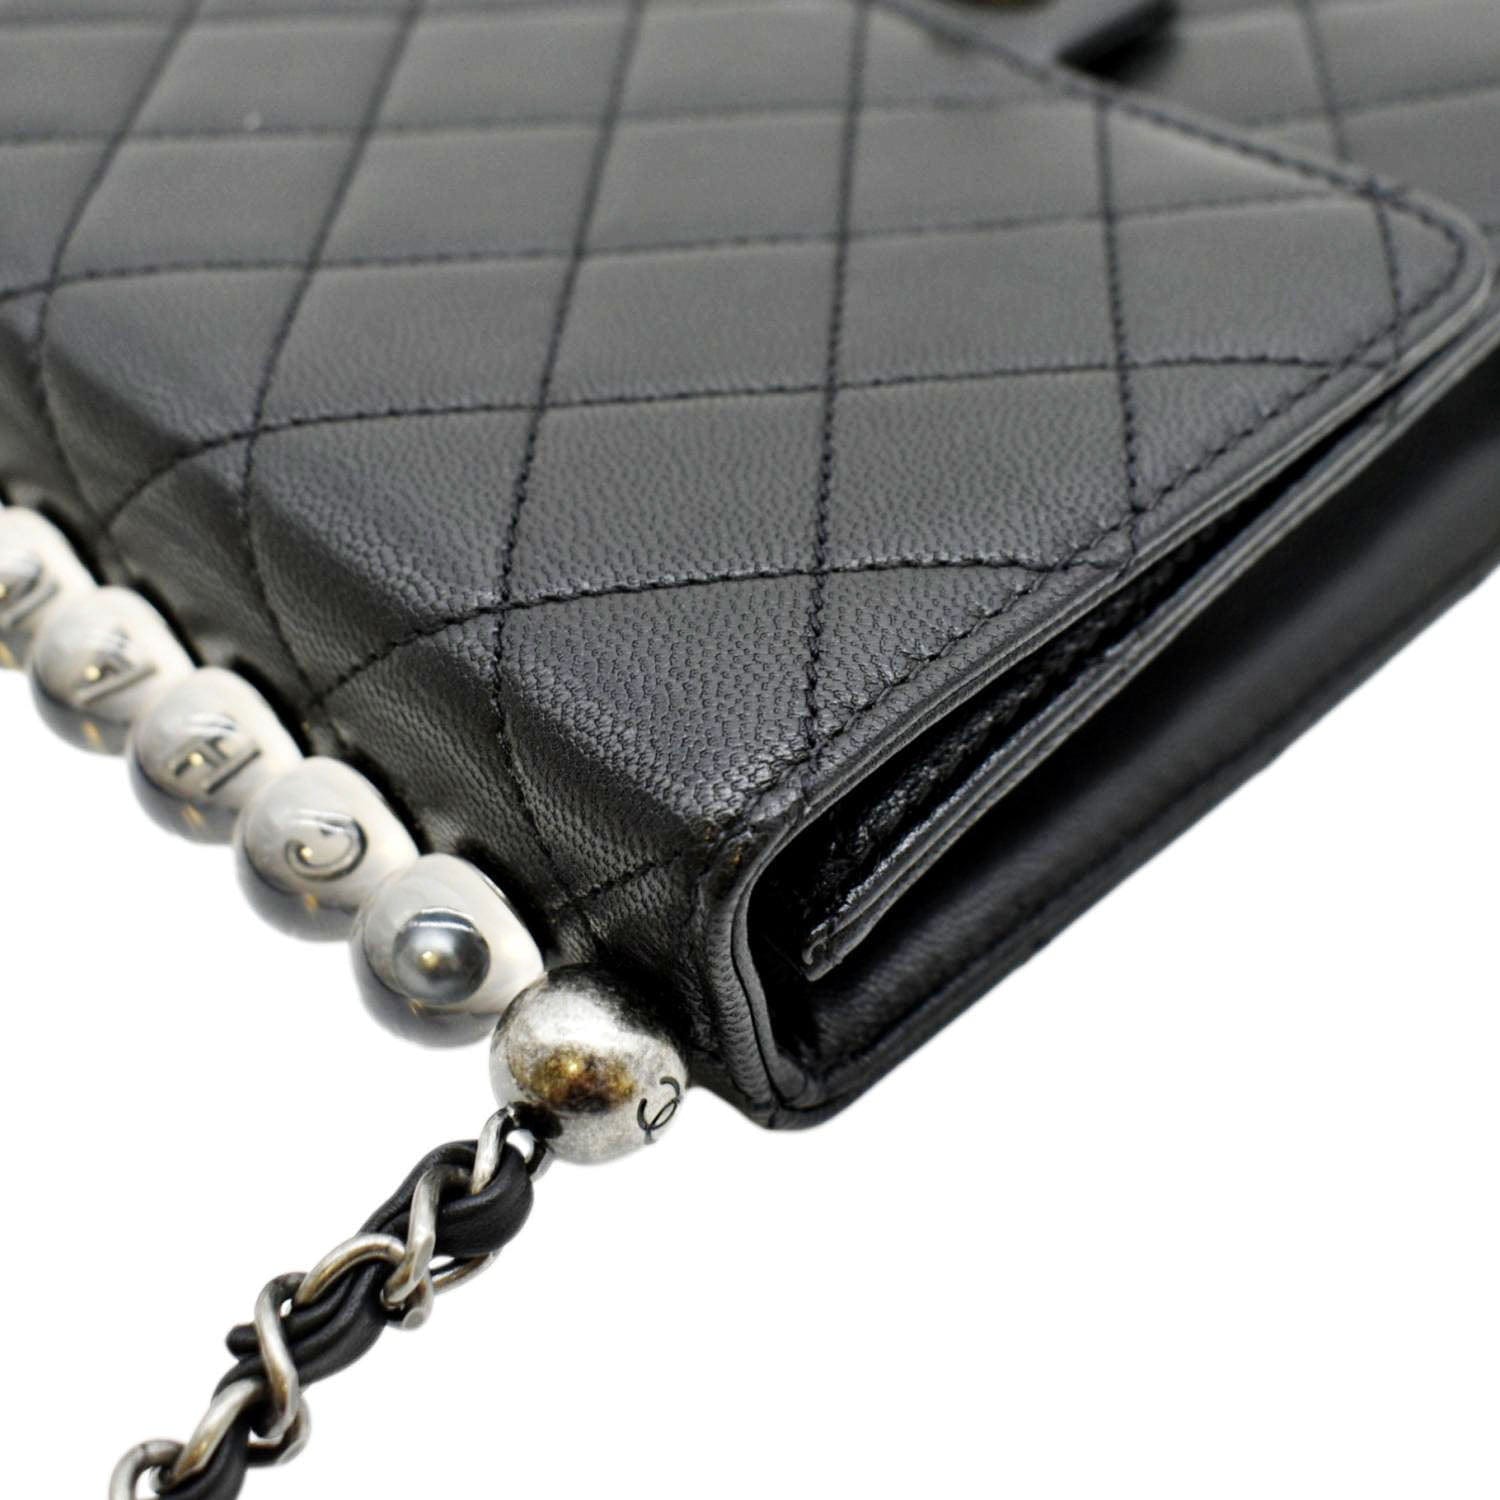 Pristine 19S Chanel Chic Pearls Quilted Flap Bag Black GHW – Boutique Patina